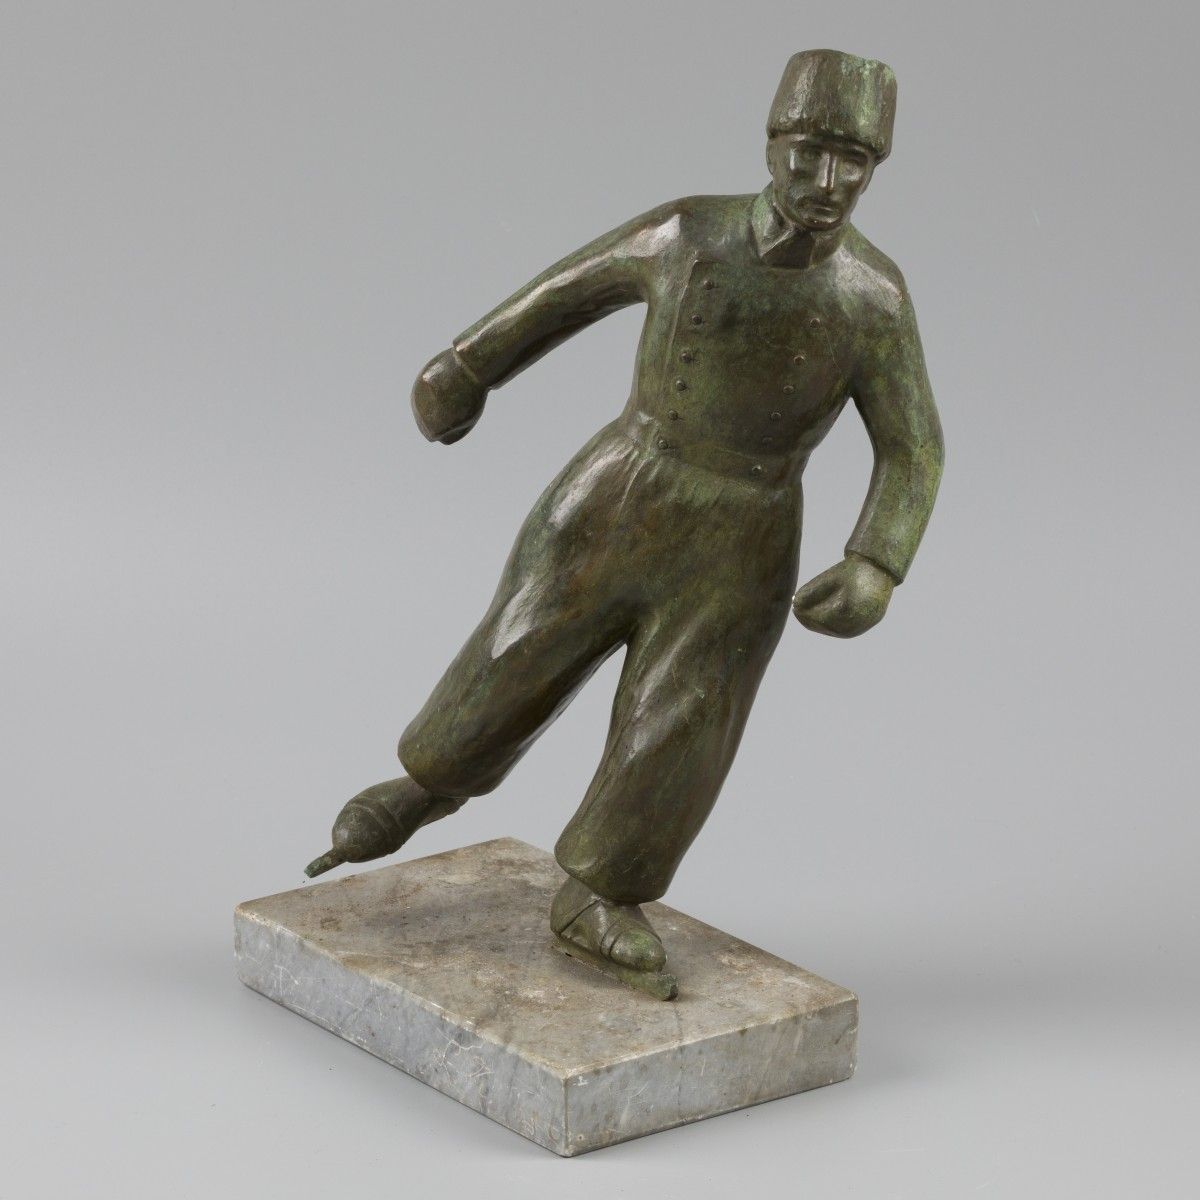 A bronze statuette of a fisherman from Volendam on skates. 35 x 21 x 12 cm.